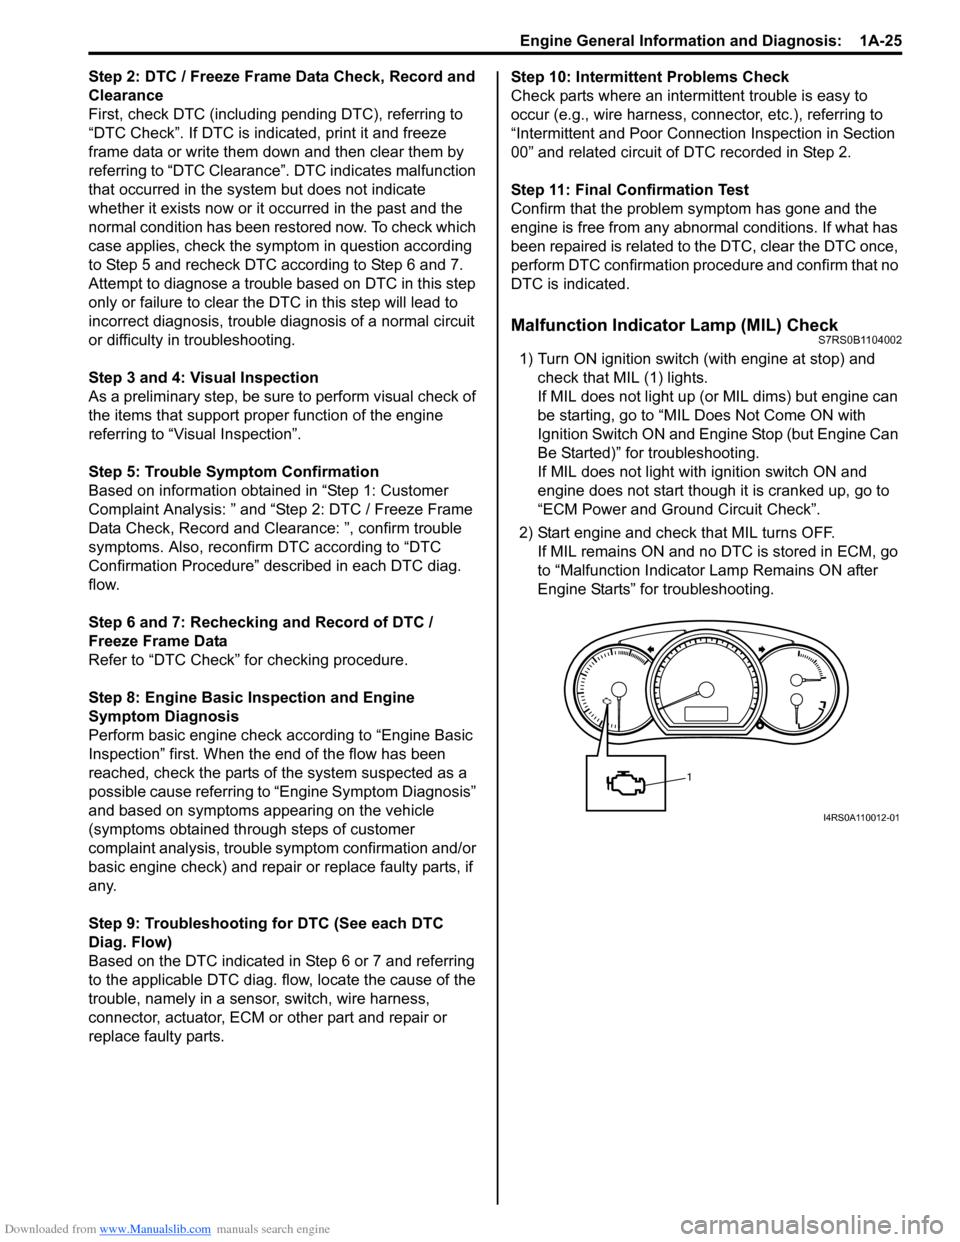 SUZUKI SWIFT 2006 2.G Service Workshop Manual Downloaded from www.Manualslib.com manuals search engine Engine General Information and Diagnosis:  1A-25
Step 2: DTC / Freeze Frame Data Check, Record and 
Clearance
First, check DTC (including pendi